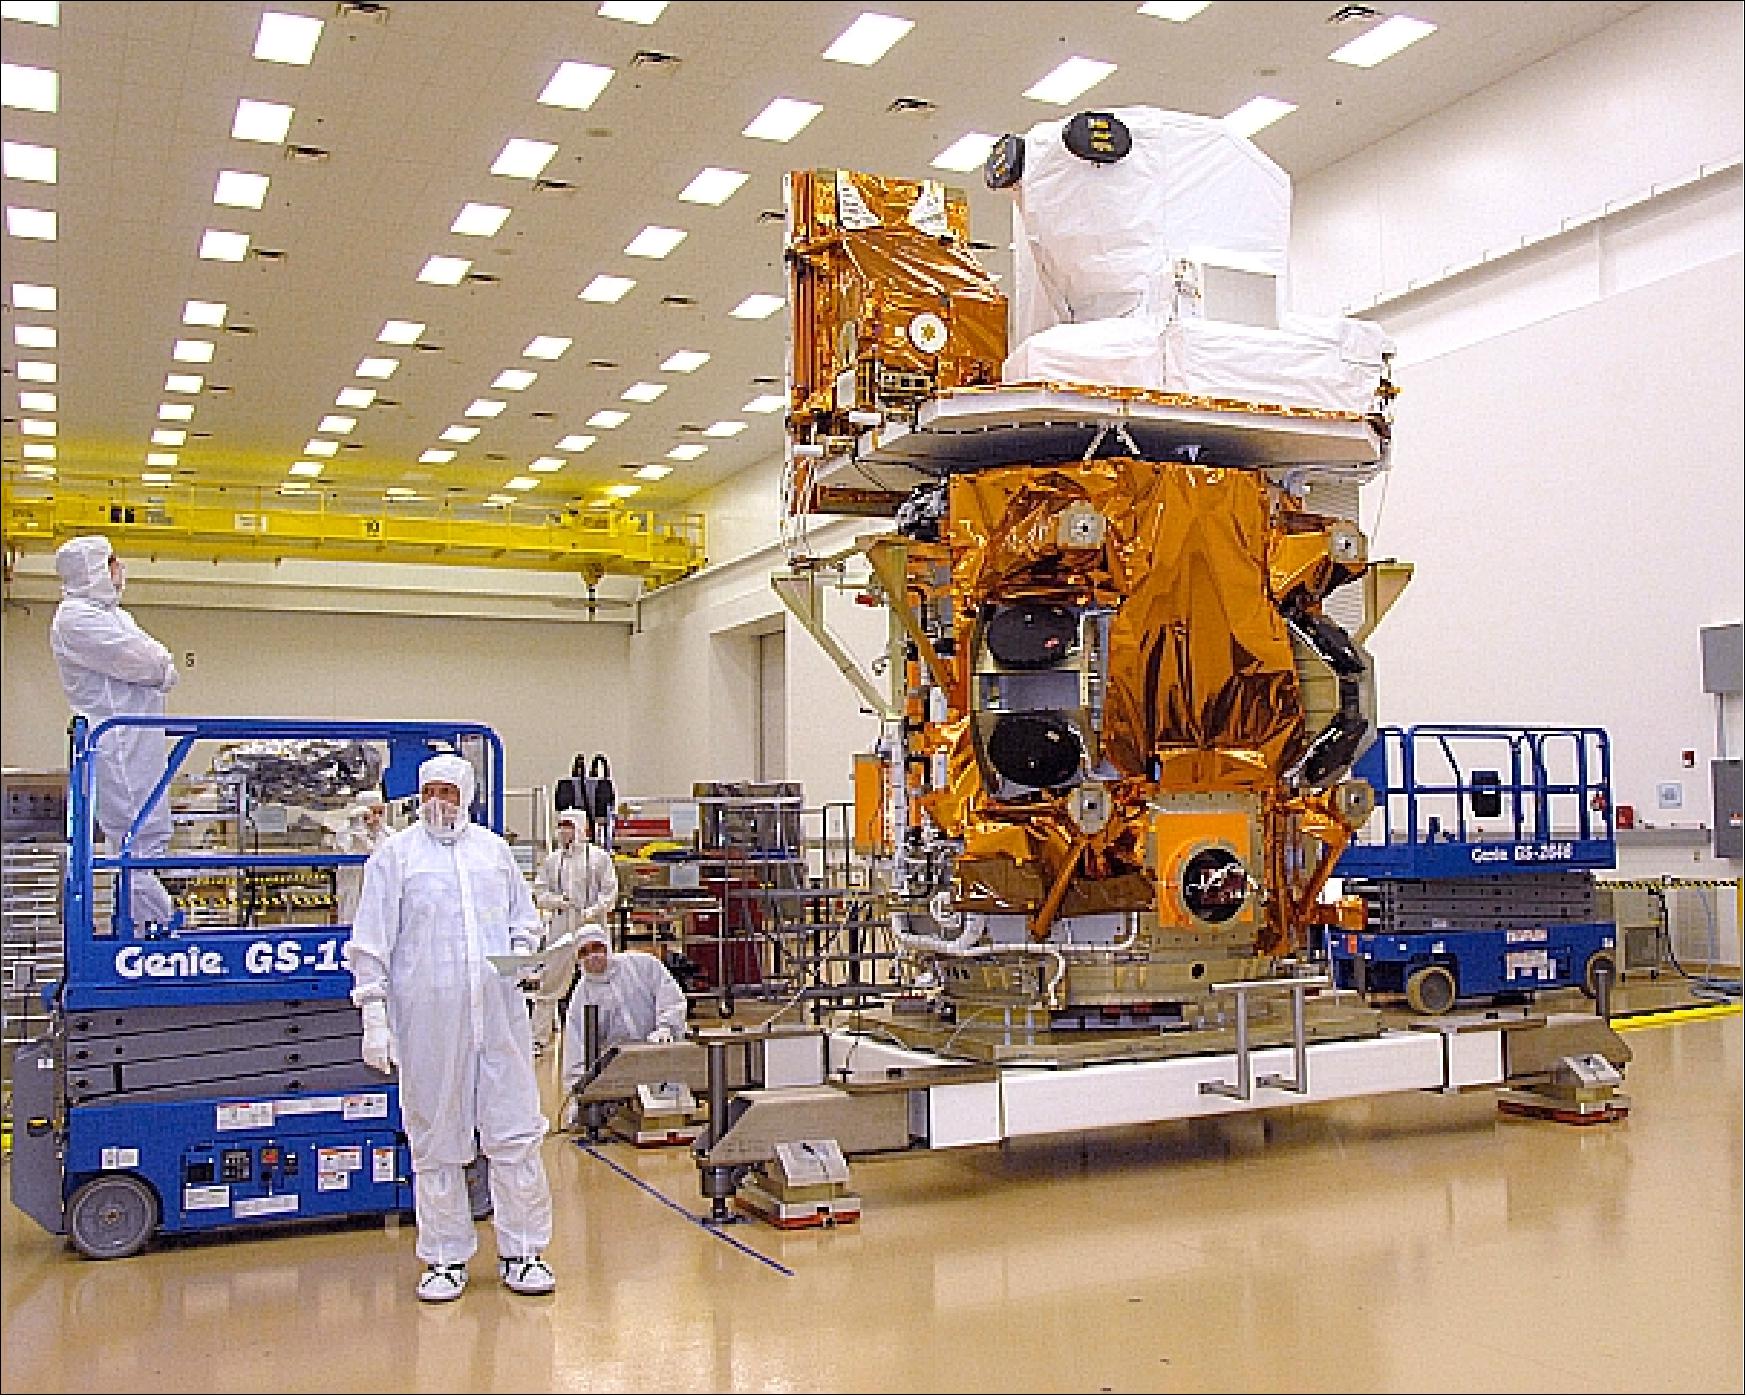 Figure 10: The LDCM spacecraft with both instruments onboard, OLI and TIRS (image credit: USGS) 24)